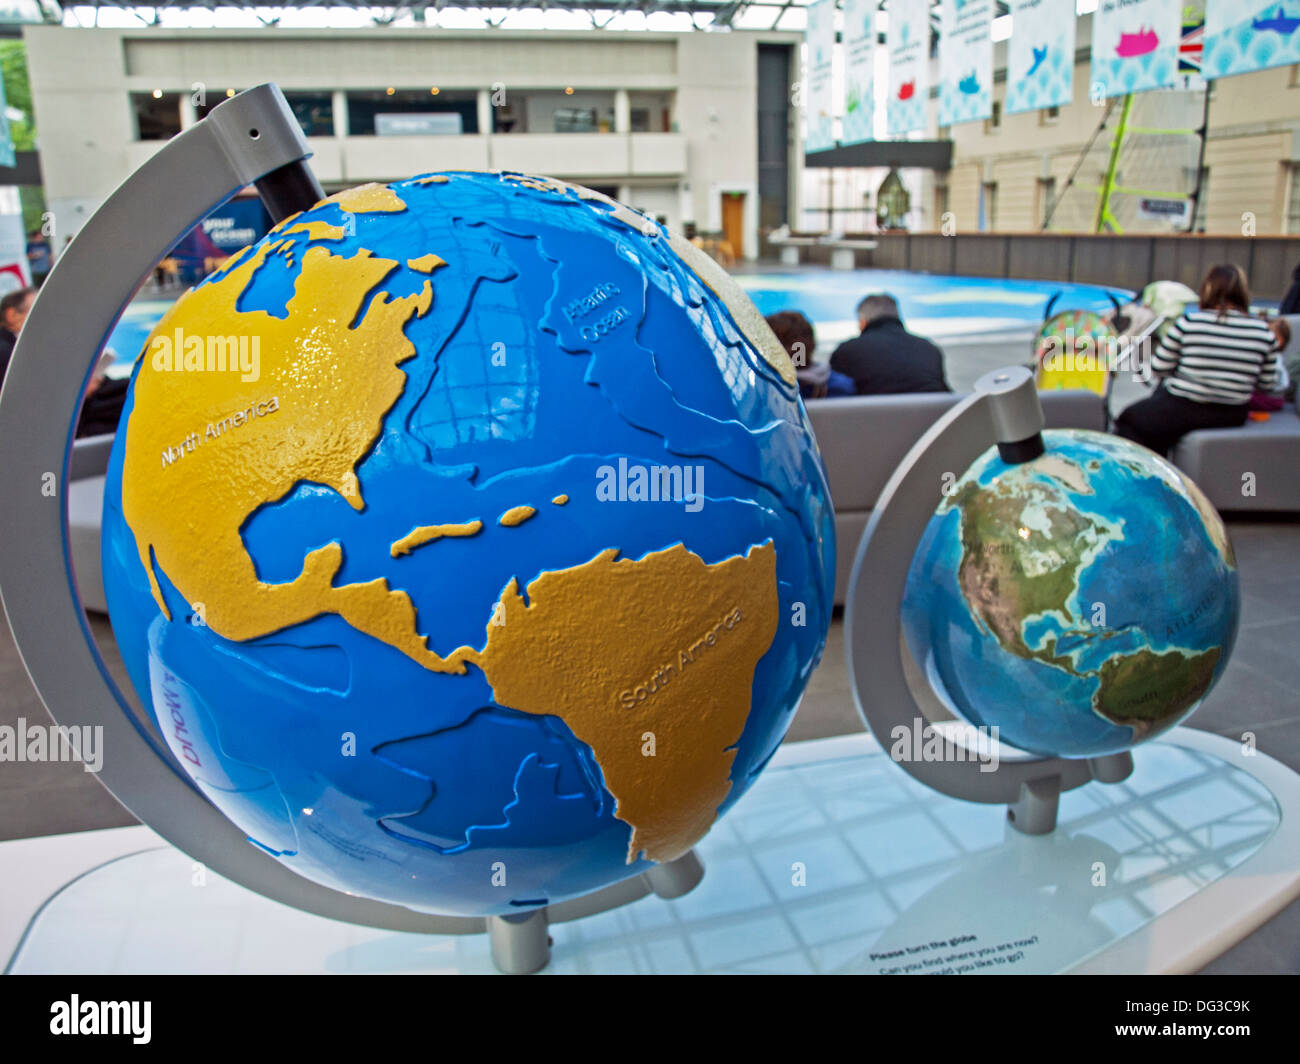 Globes at the National Maritime Museum, Greenwich, London, England, United Kingdom Stock Photo